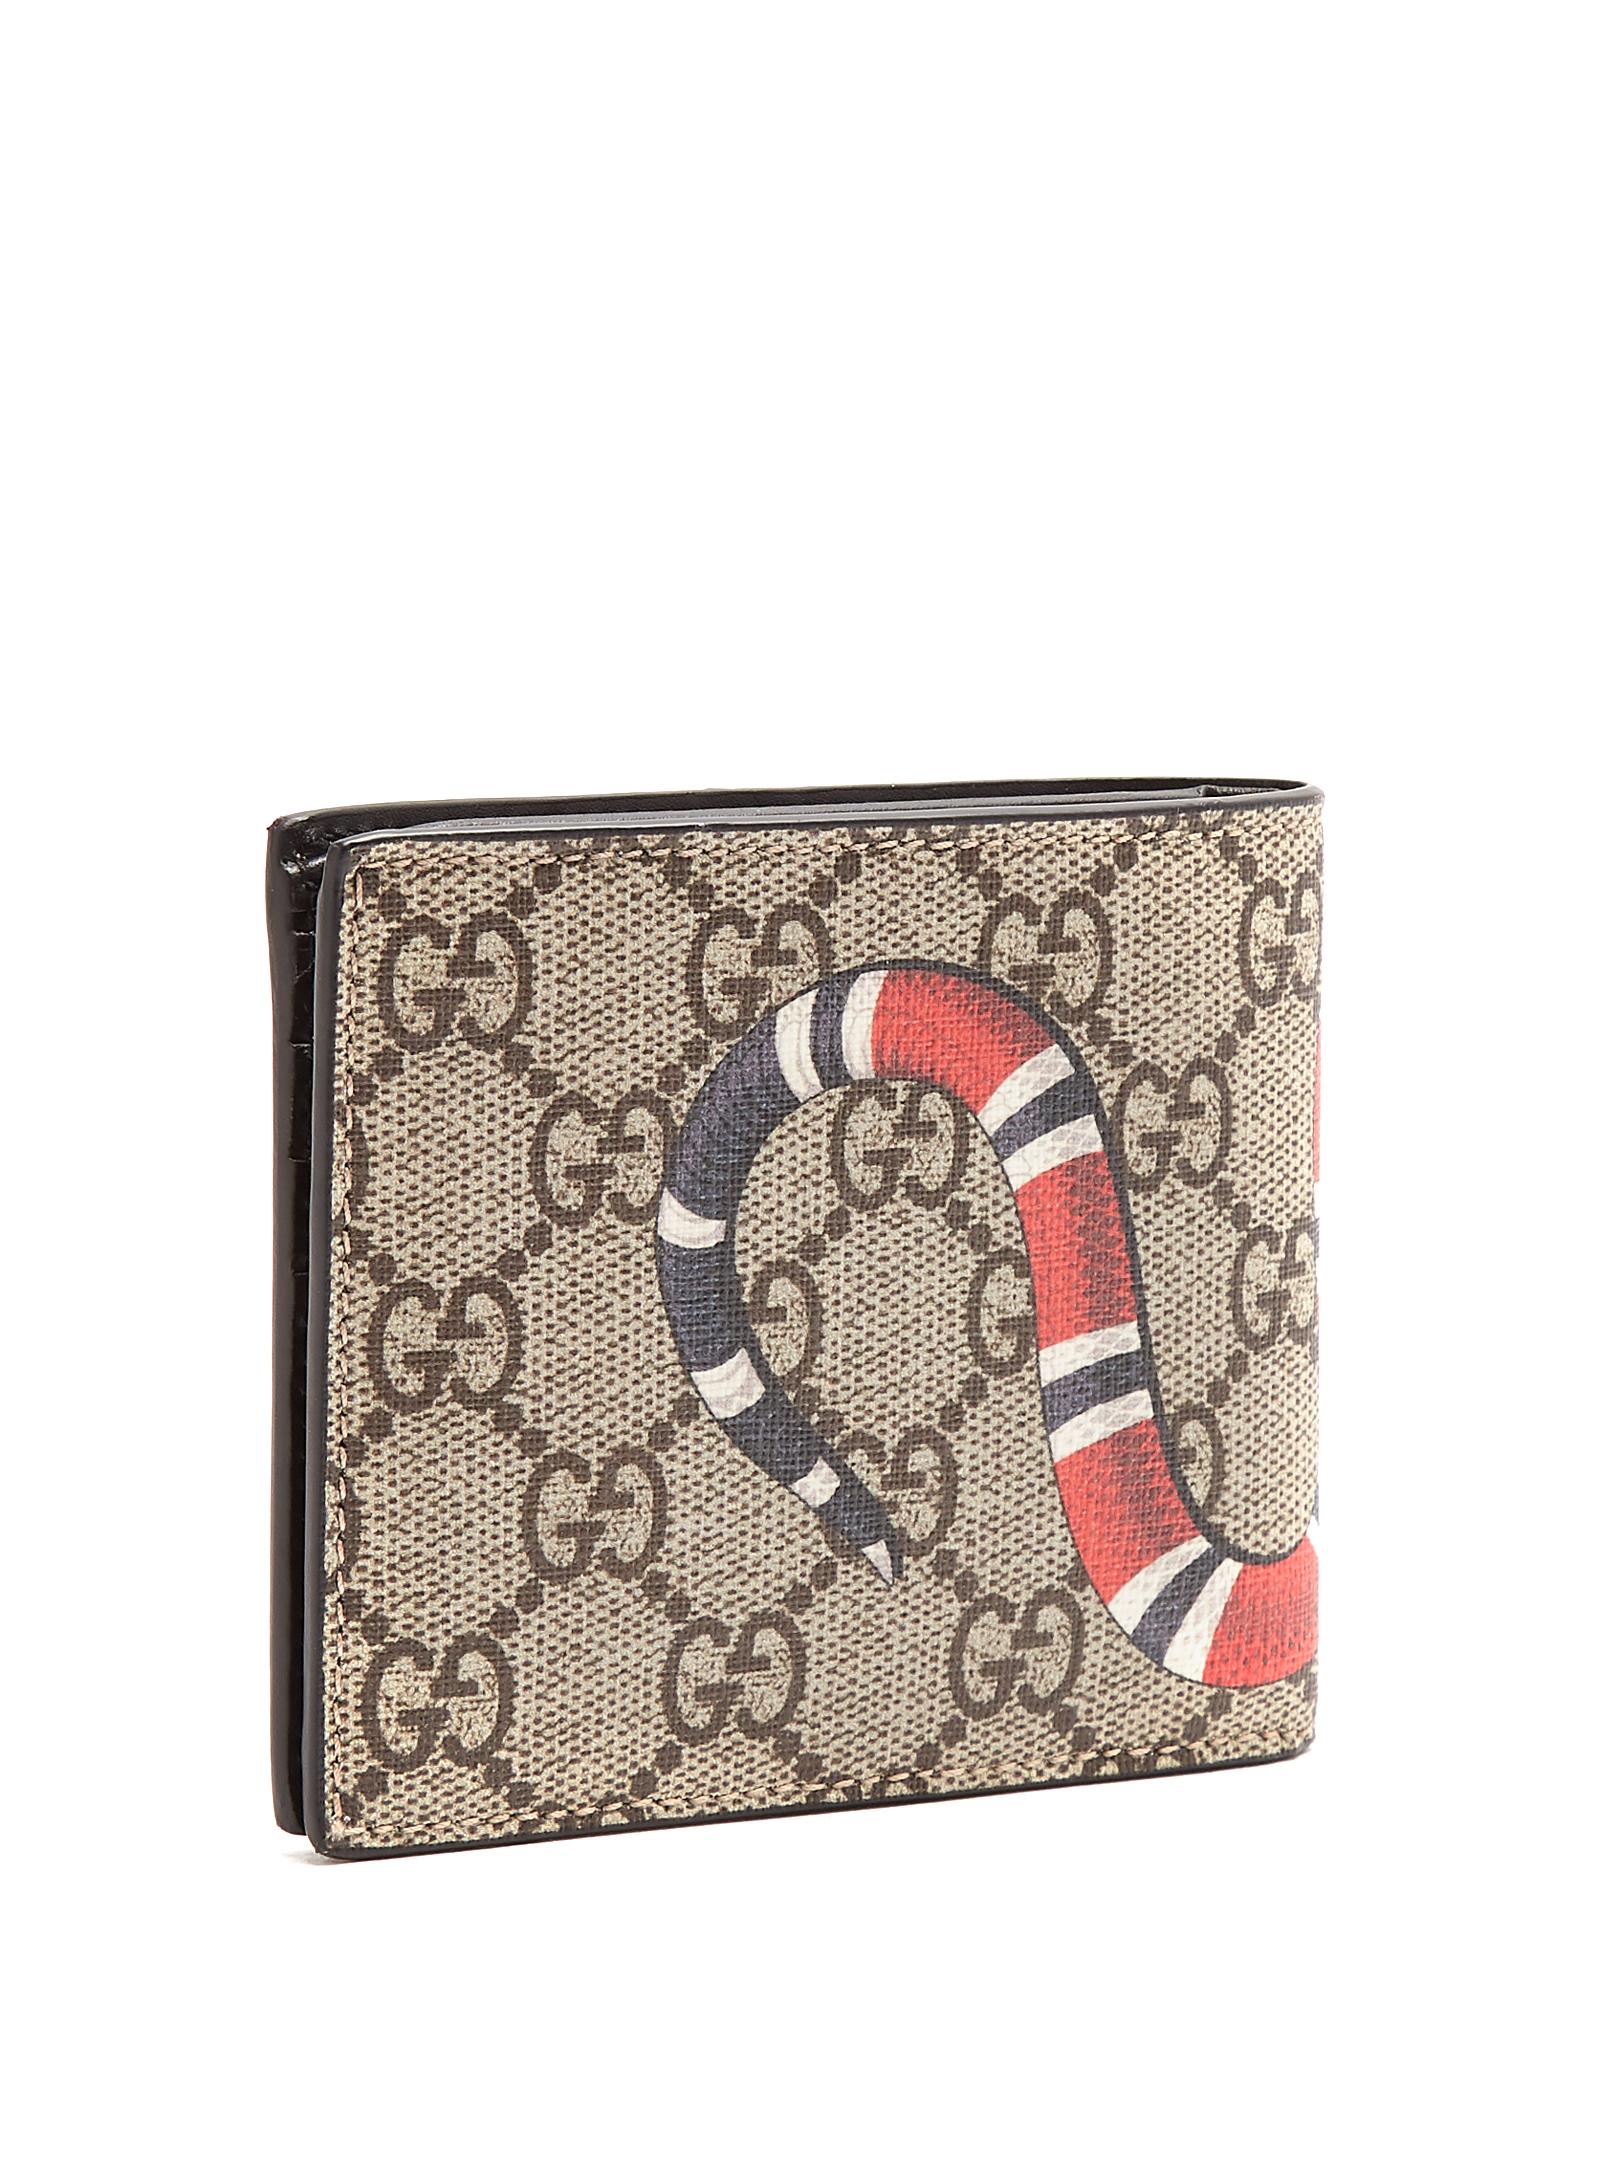 Gucci Canvas Gg Supreme Kingsnake-print Wallet in Brown - Lyst